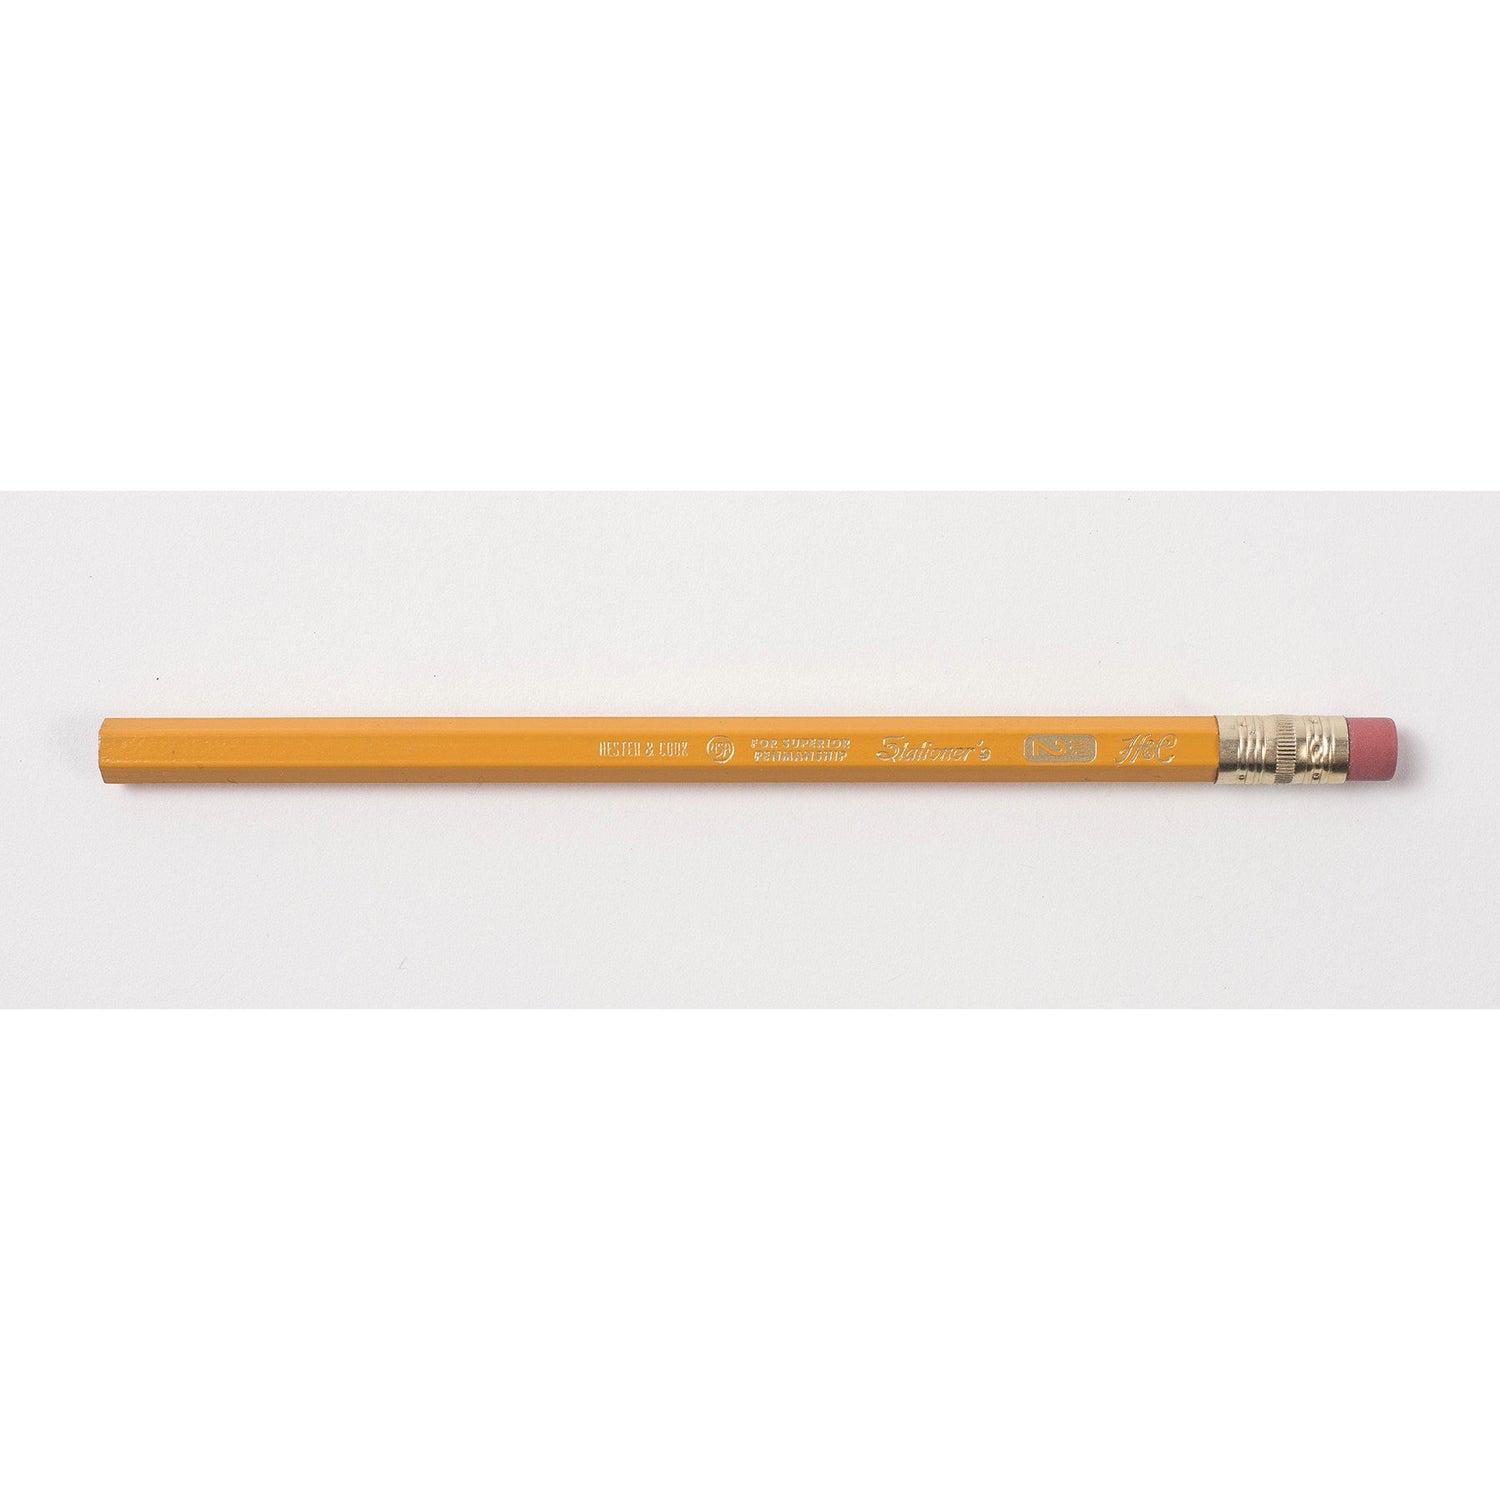 A Jumbo Hex Pencil, a writing instrument by Hester &amp; Cook, on a white background.